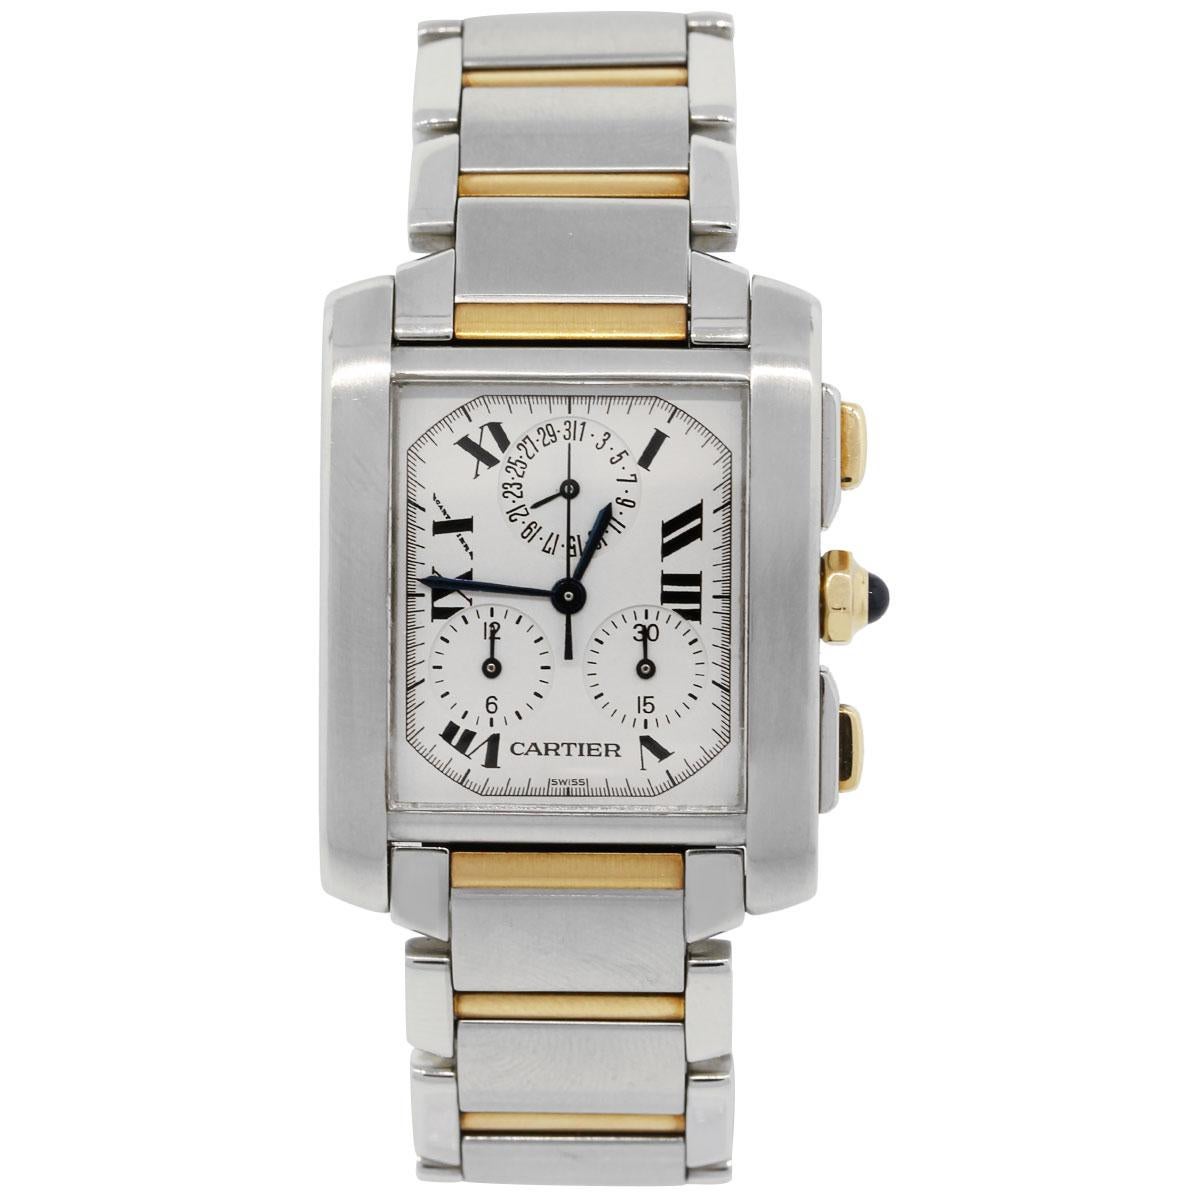 Brand: Cartier
MPN: 2303
Model: Tank
Case Material: 18k yellow gold and Stainless steel
Case Diameter: 28mm x 36mm
Crystal: Scratch resistant sapphire
Bezel: Smooth brushed stainless steel bezel
Dial: White roman dial with blue hands
Bracelet: 18k